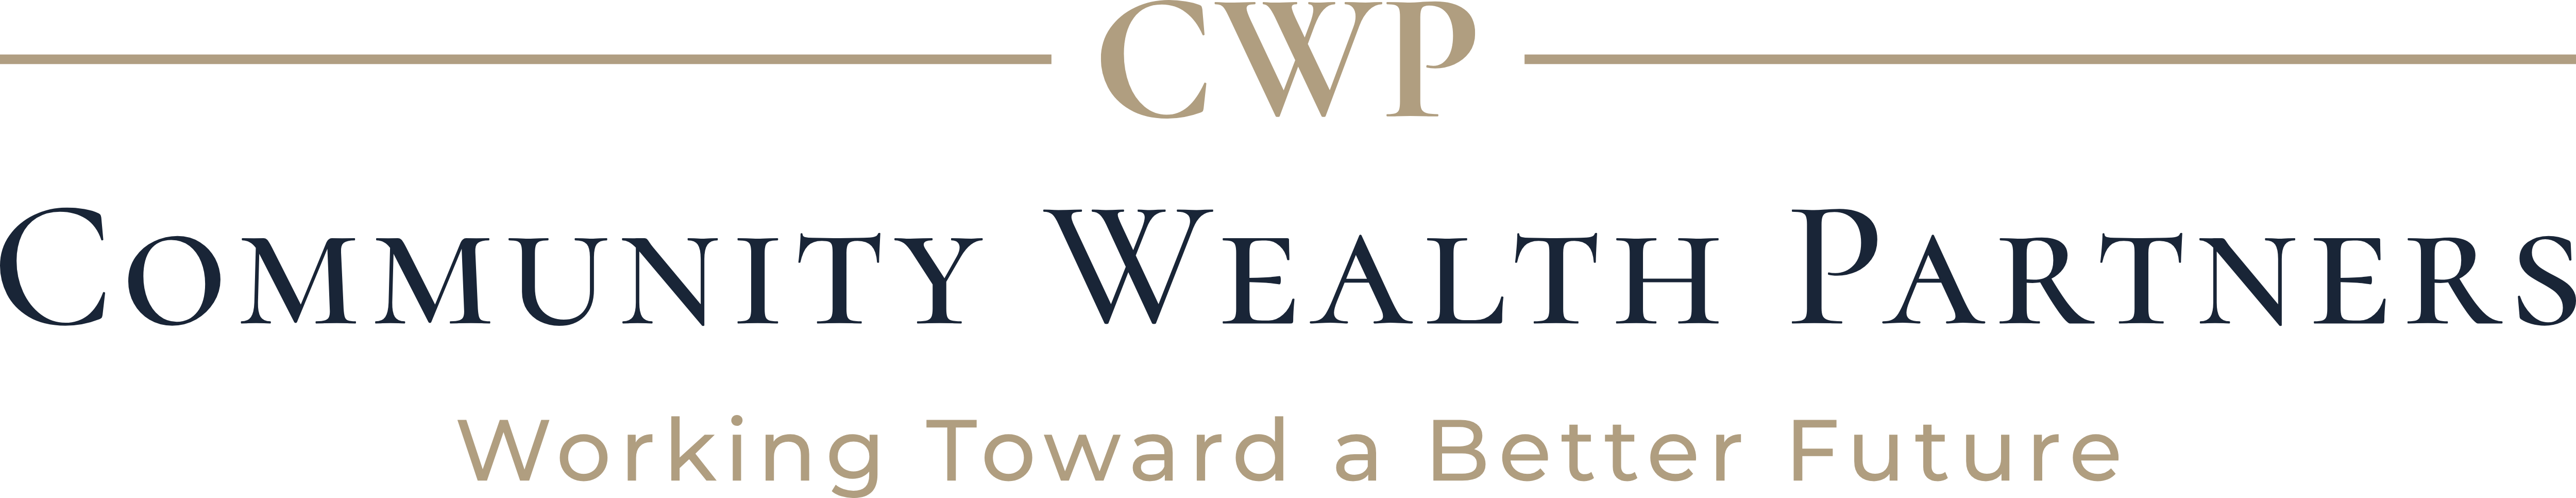 Community Wealth Partners of Greater Cleveland logo